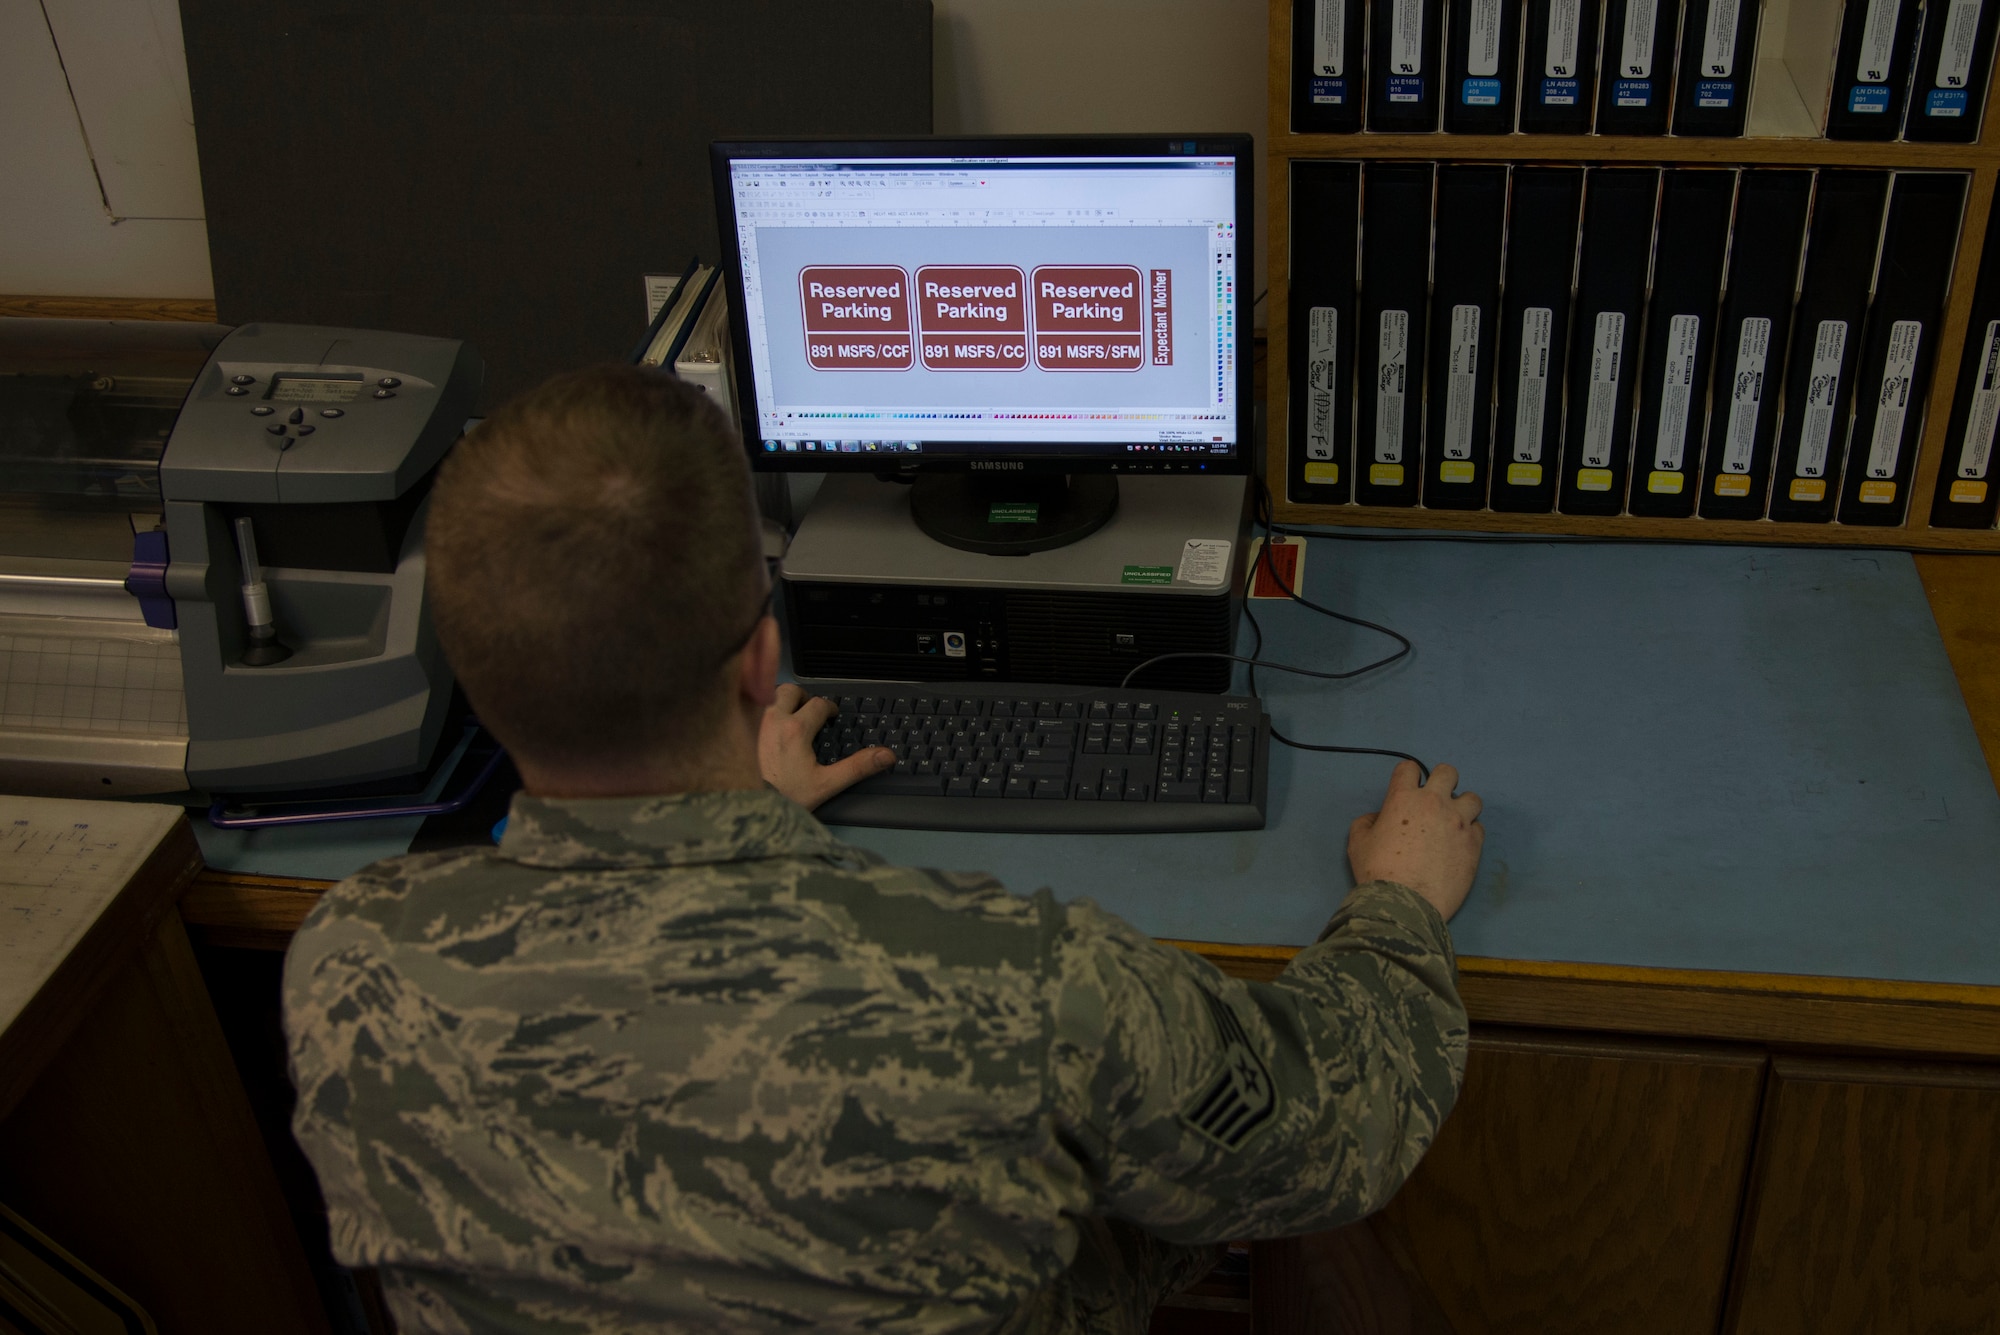 Staff Sgt. Horace Hand, 5th Civil Engineer Squadron structural craftsman, creates a sign at the sign shop on Minot Air Force Base, N.D., April 27, 2017. Airmen assigned to the sign shop use design software to create templates used across the base and missile complex. (U.S. Air Force photo/Airman 1st Class Dillon Audit)